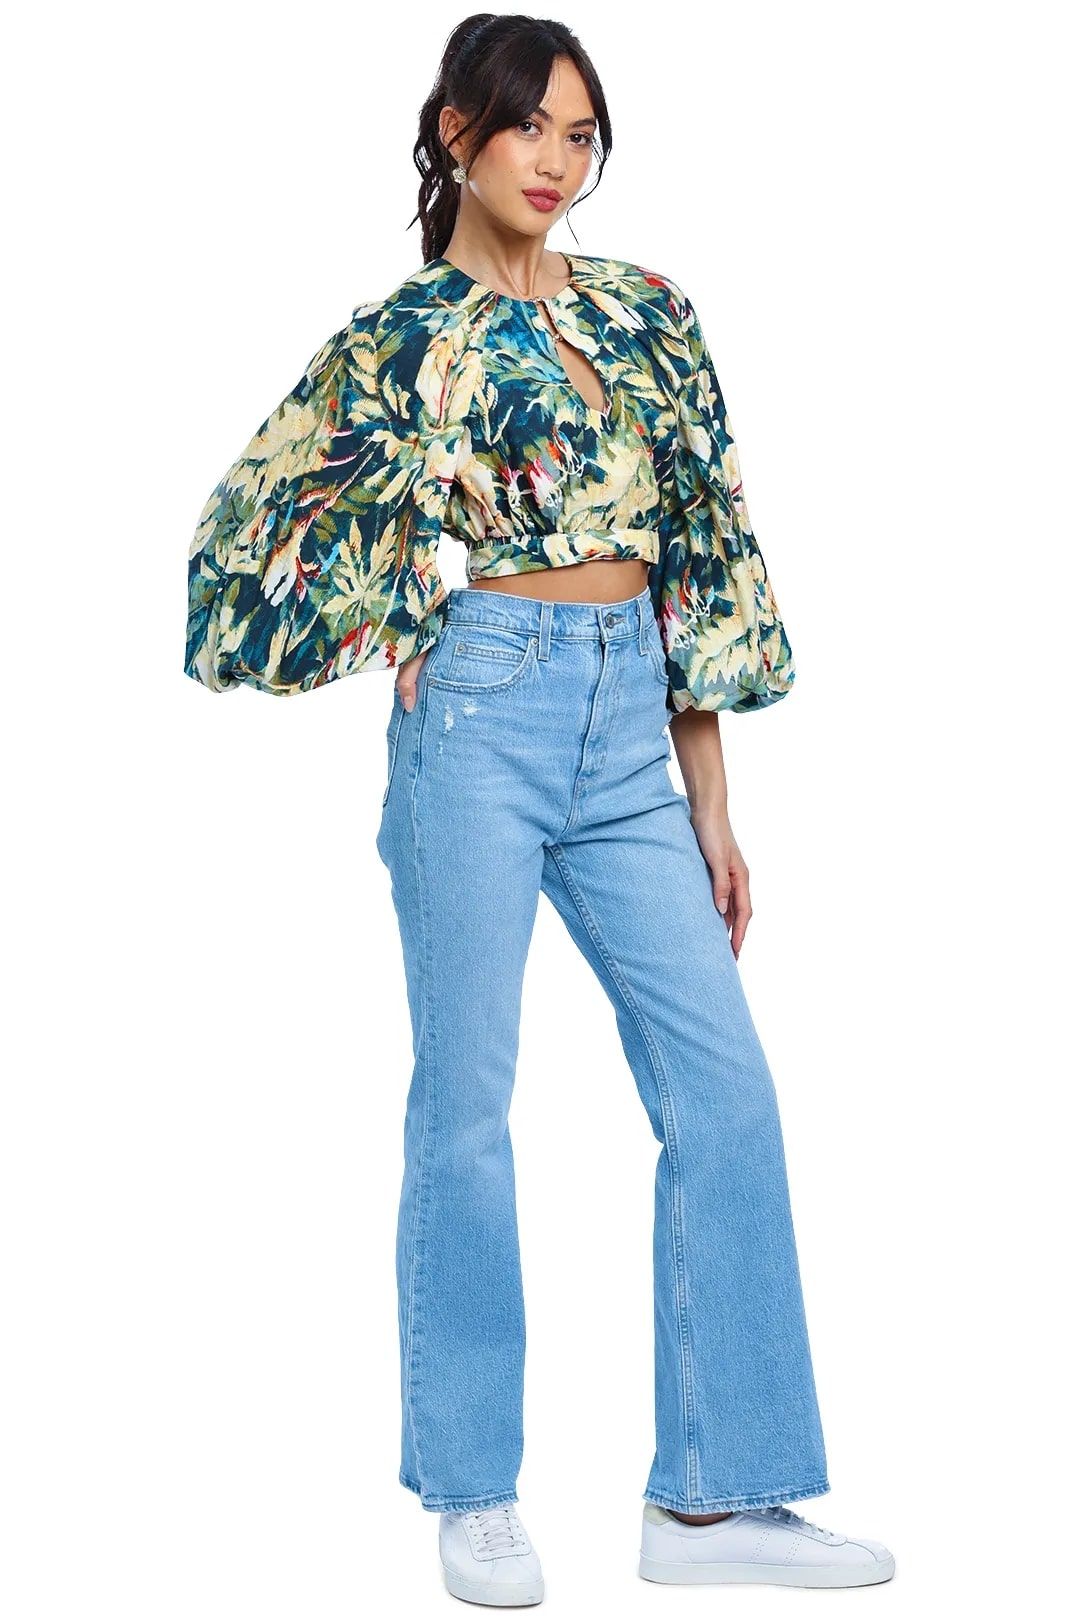 Rent Harlow top for spring fashion.